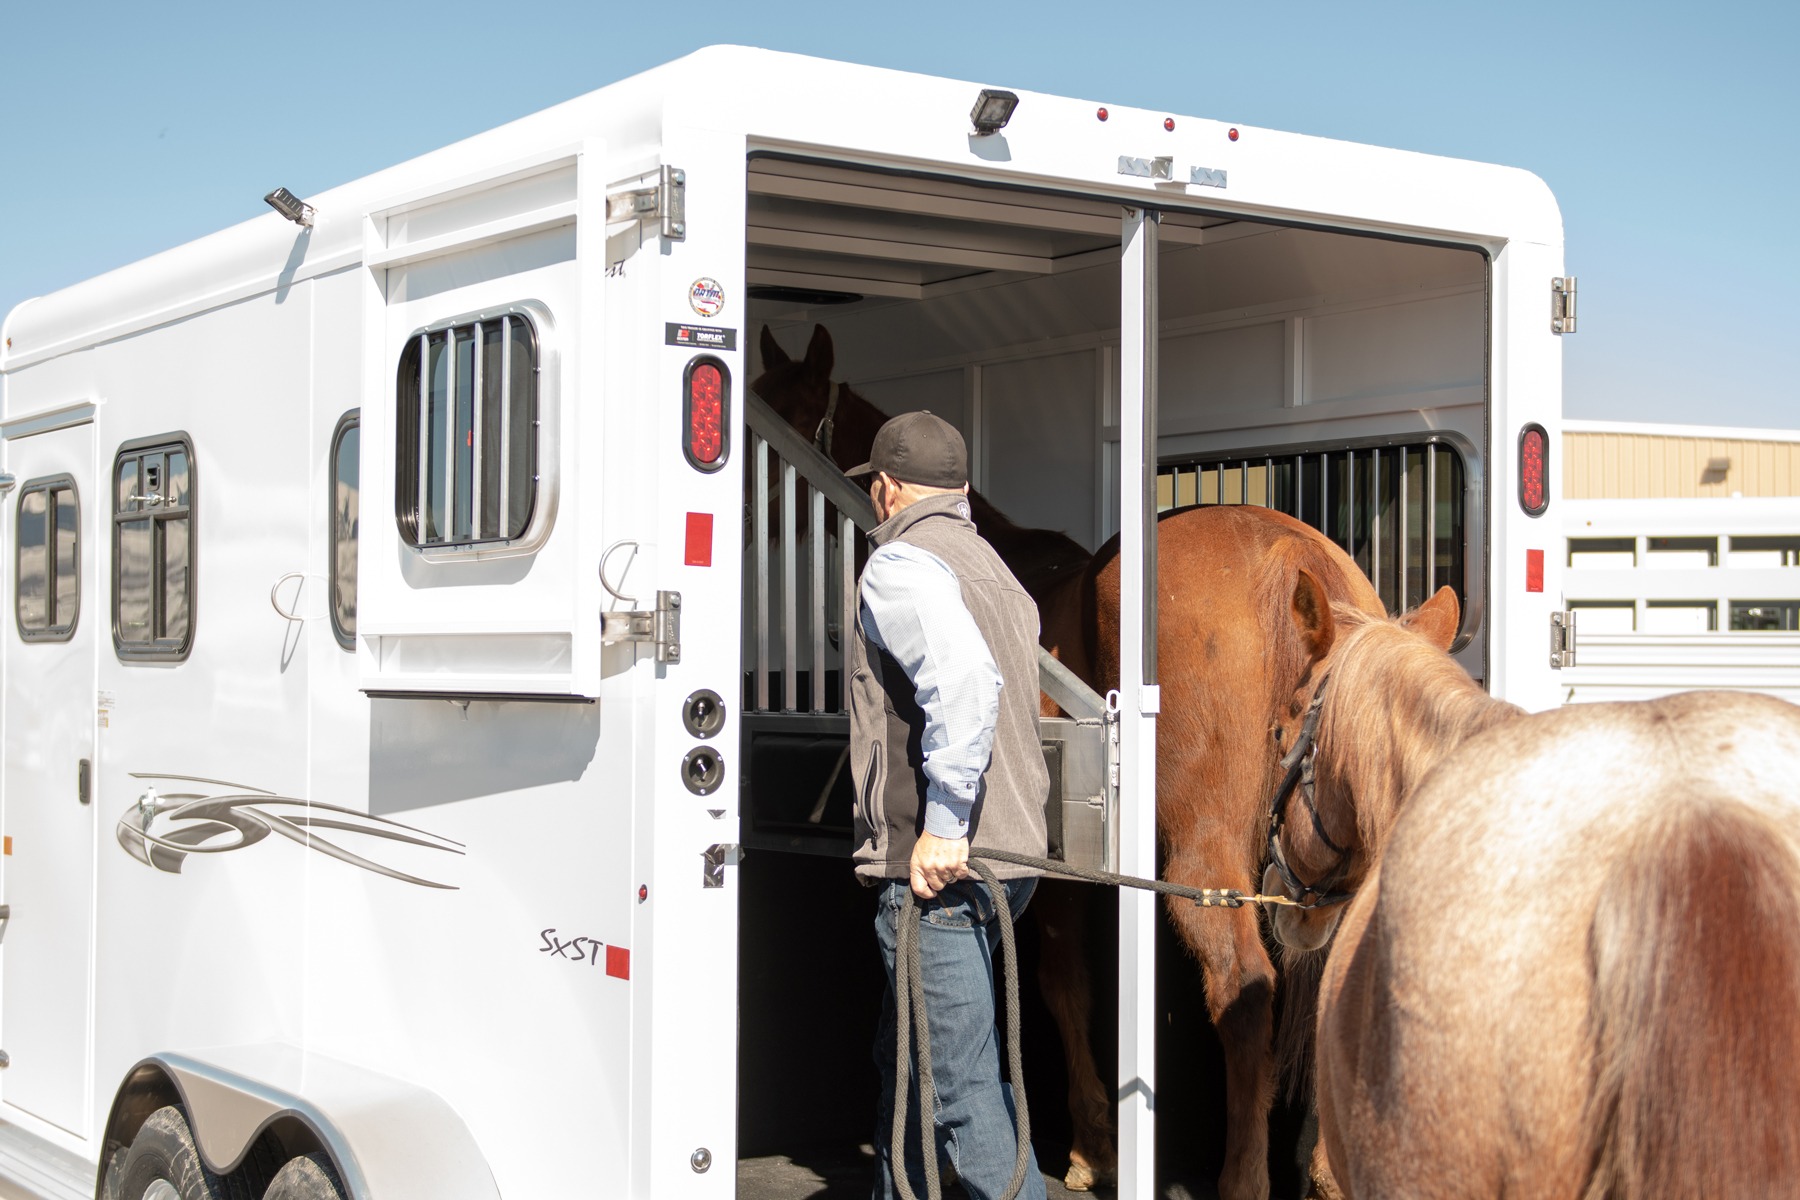 Can’t Show? Master the Skills of Loading Your Horse in Its Trailer